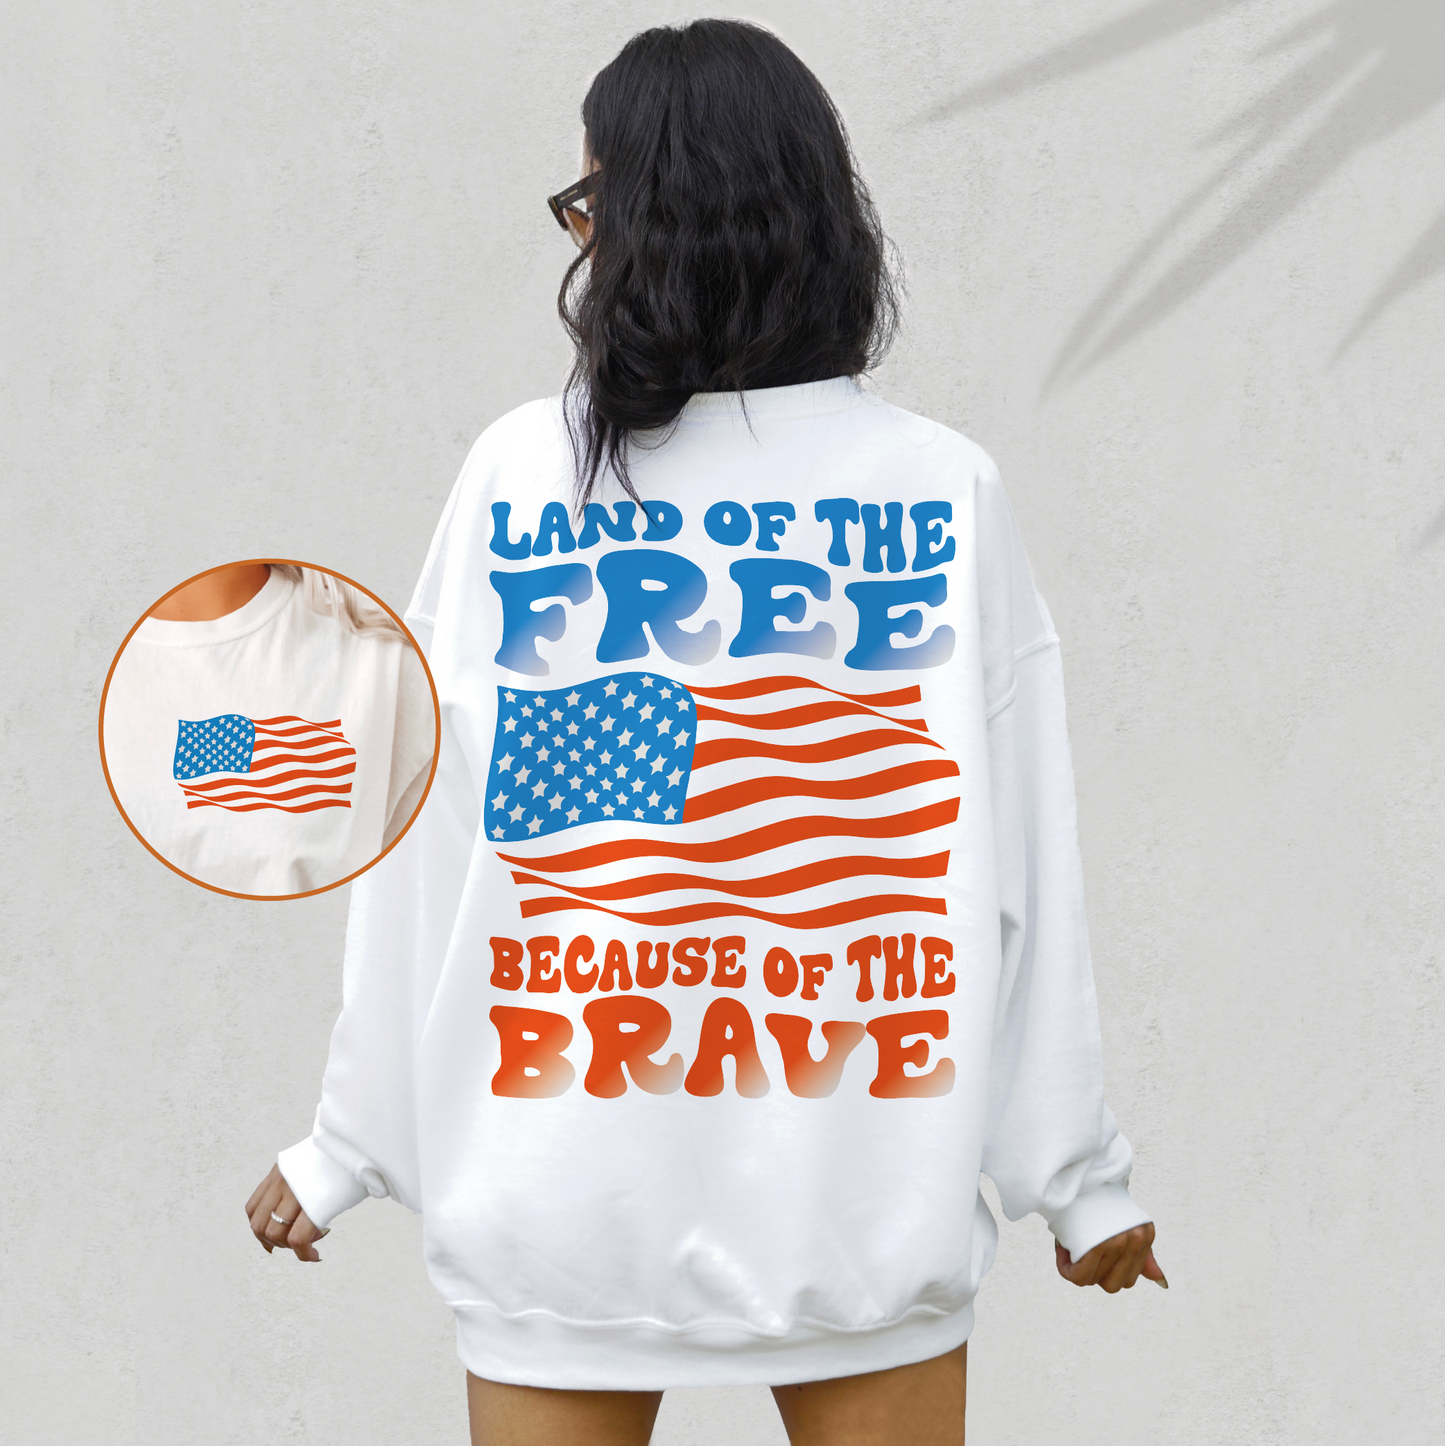 Free Sublimation Design for Shirts: 4th of July Design